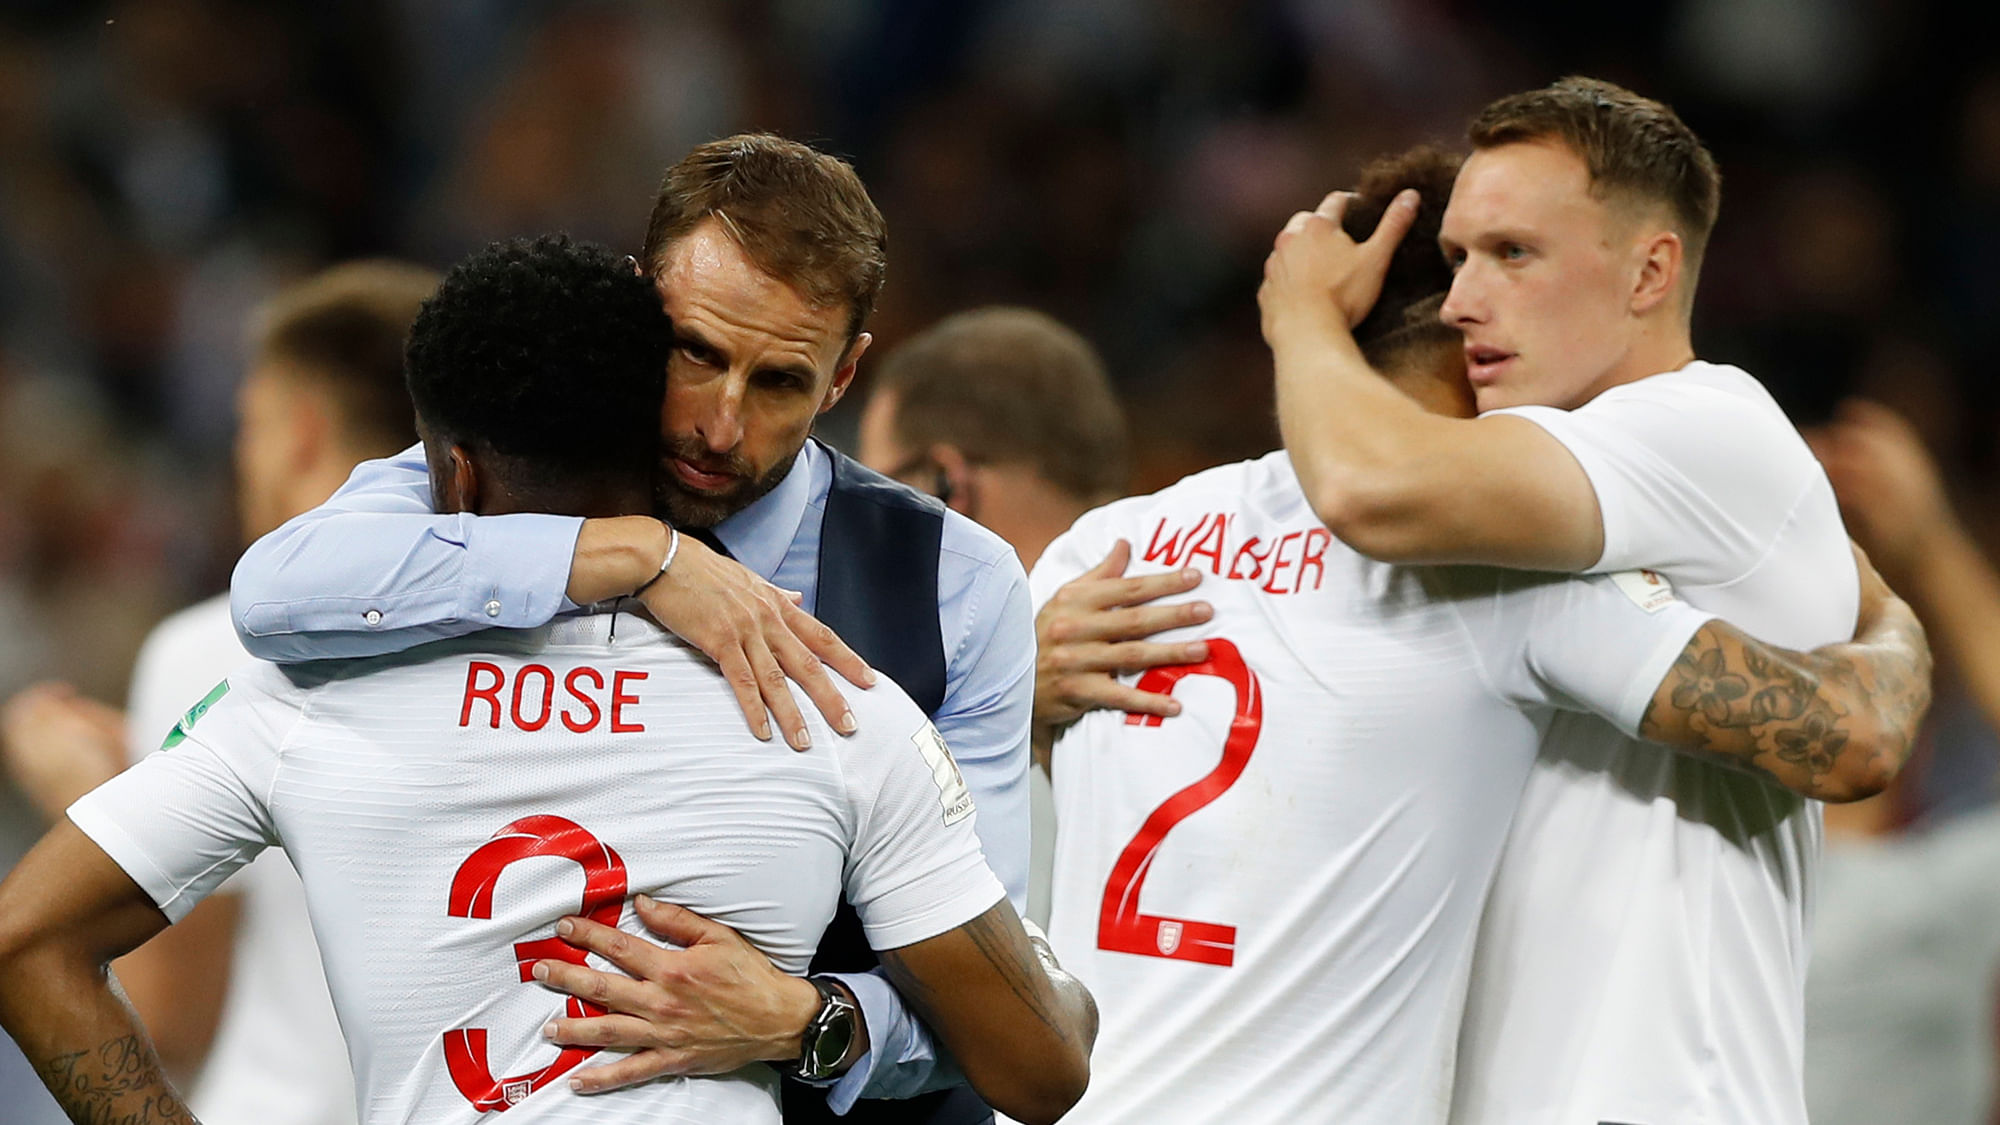 England head coach Gareth Southgate, 2nd left, comforts England’s Danny Rose, left, after loosing the semifinal match between Croatia and England at the 2018 soccer World Cup in the Luzhniki Stadium in Moscow, Russia, Wednesday, July 11, 2018.&nbsp;